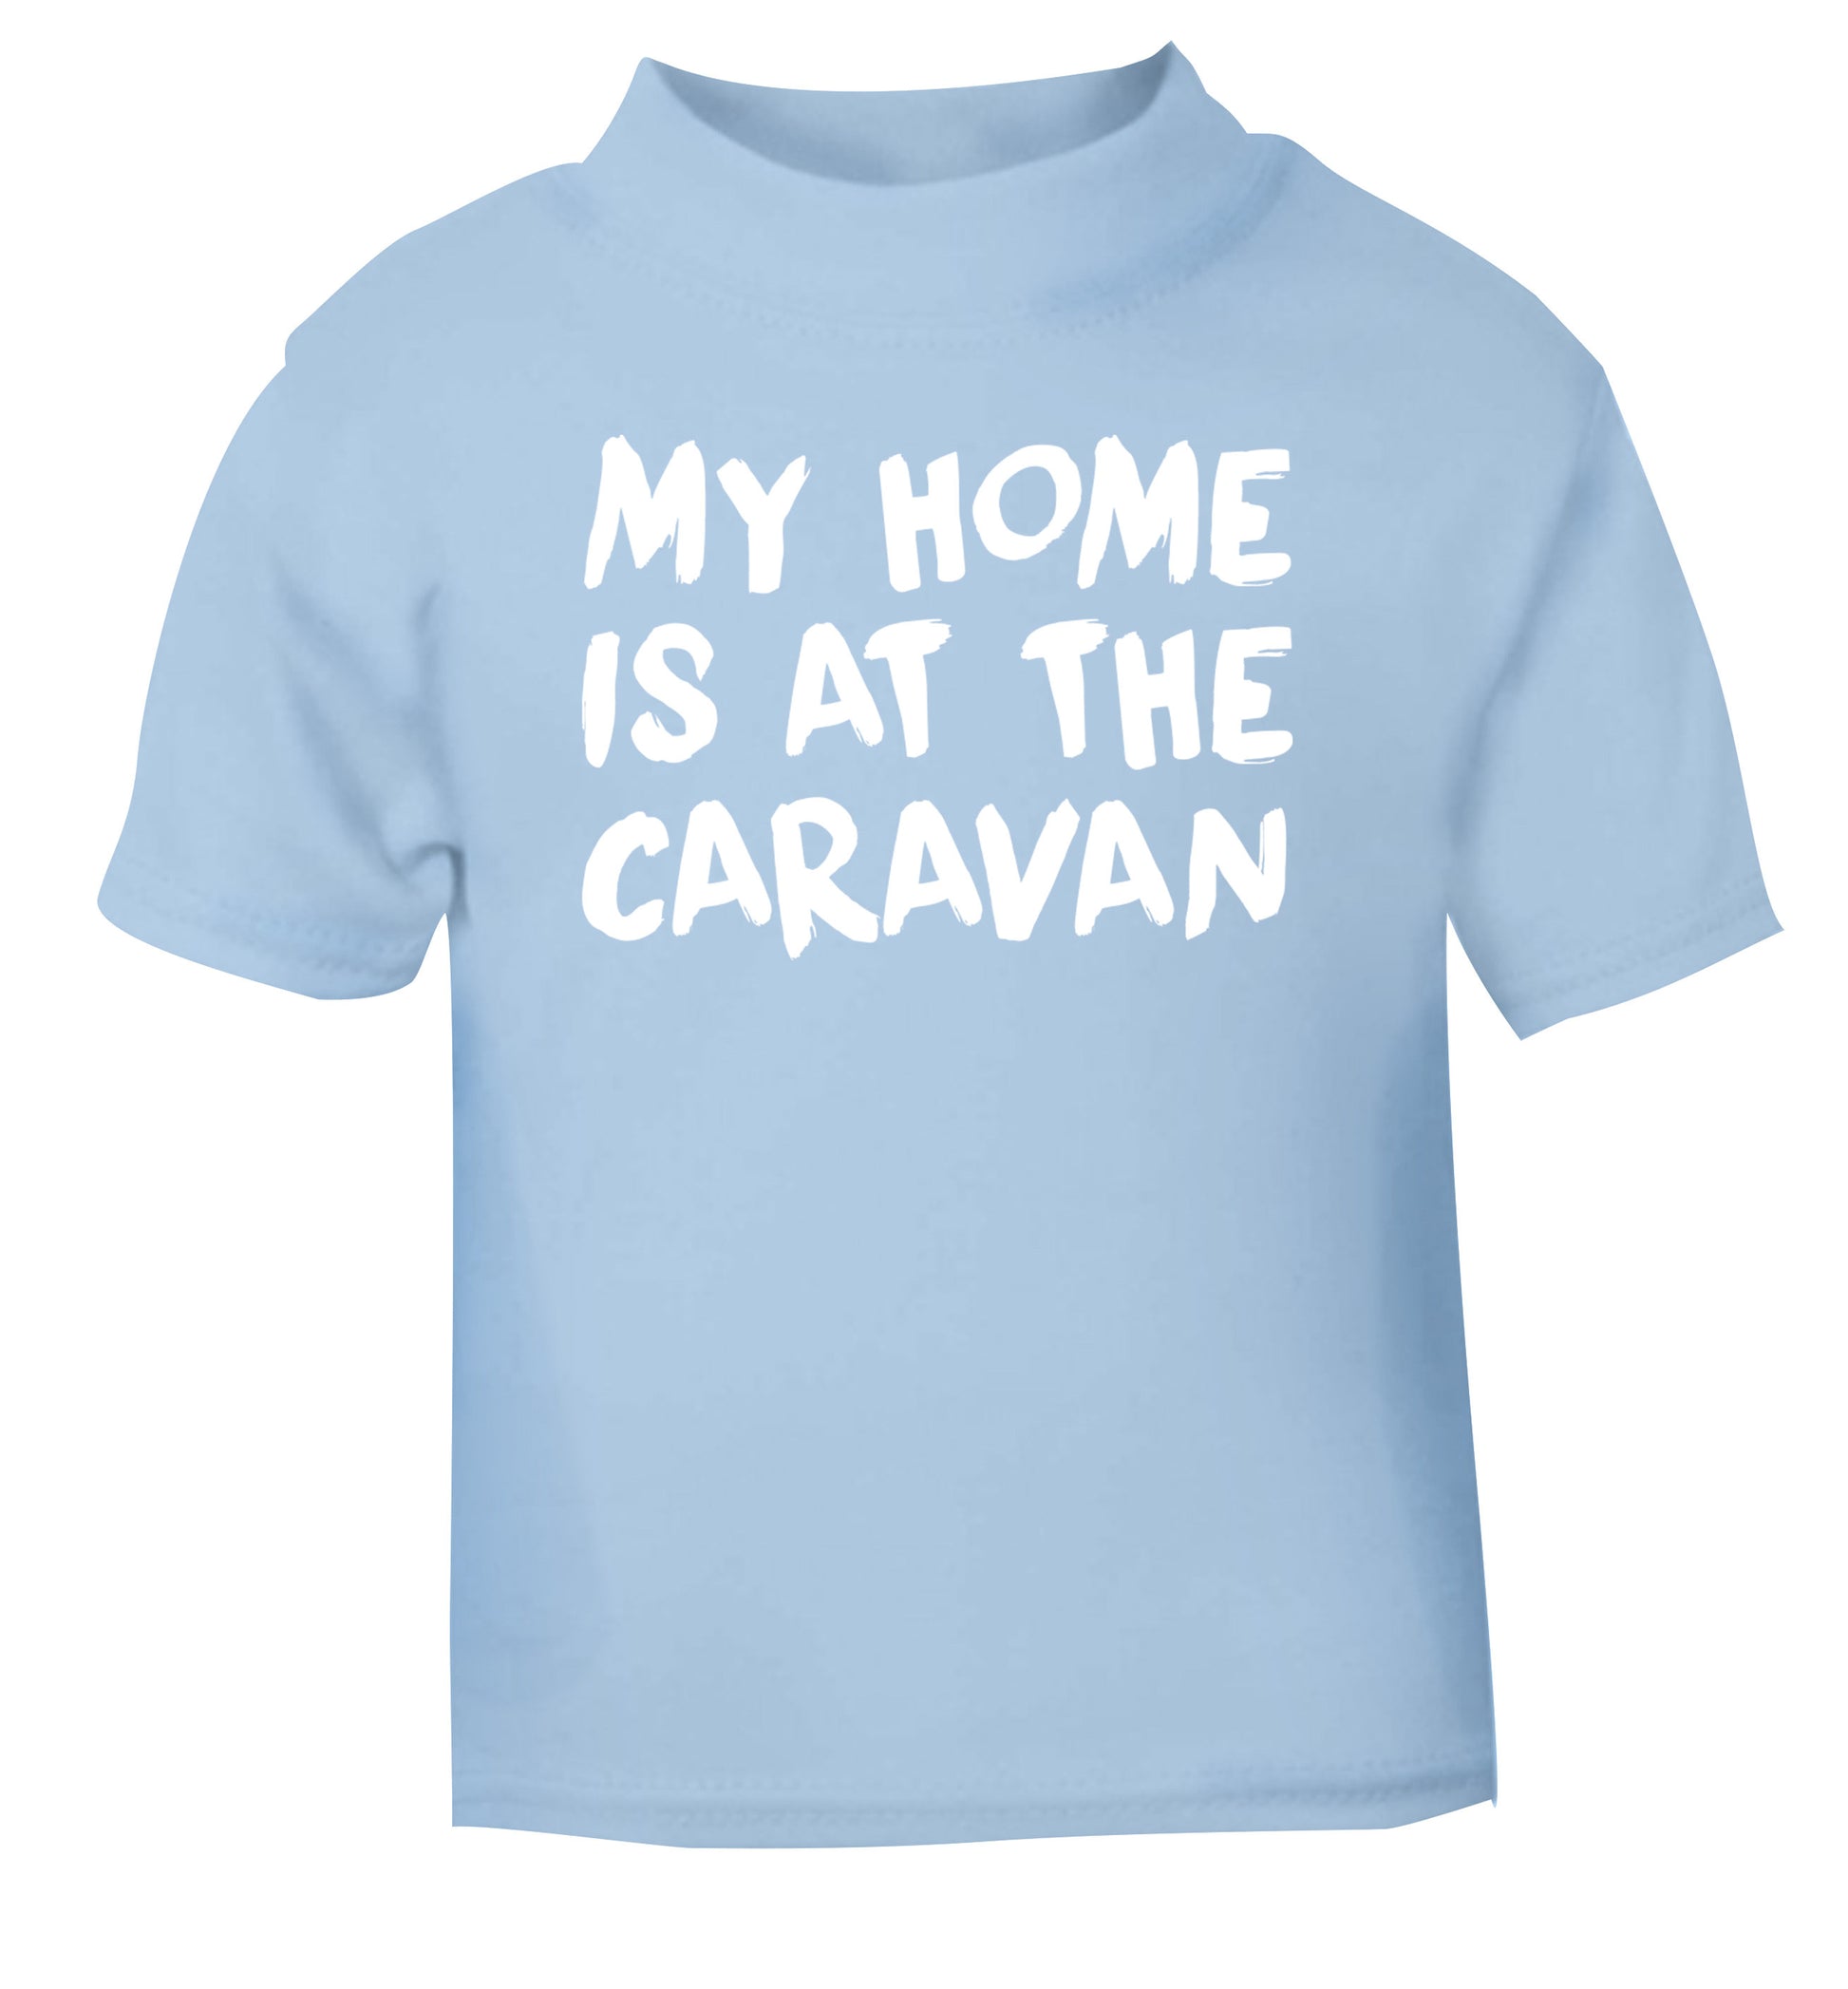 My home is at the caravan light blue Baby Toddler Tshirt 2 Years